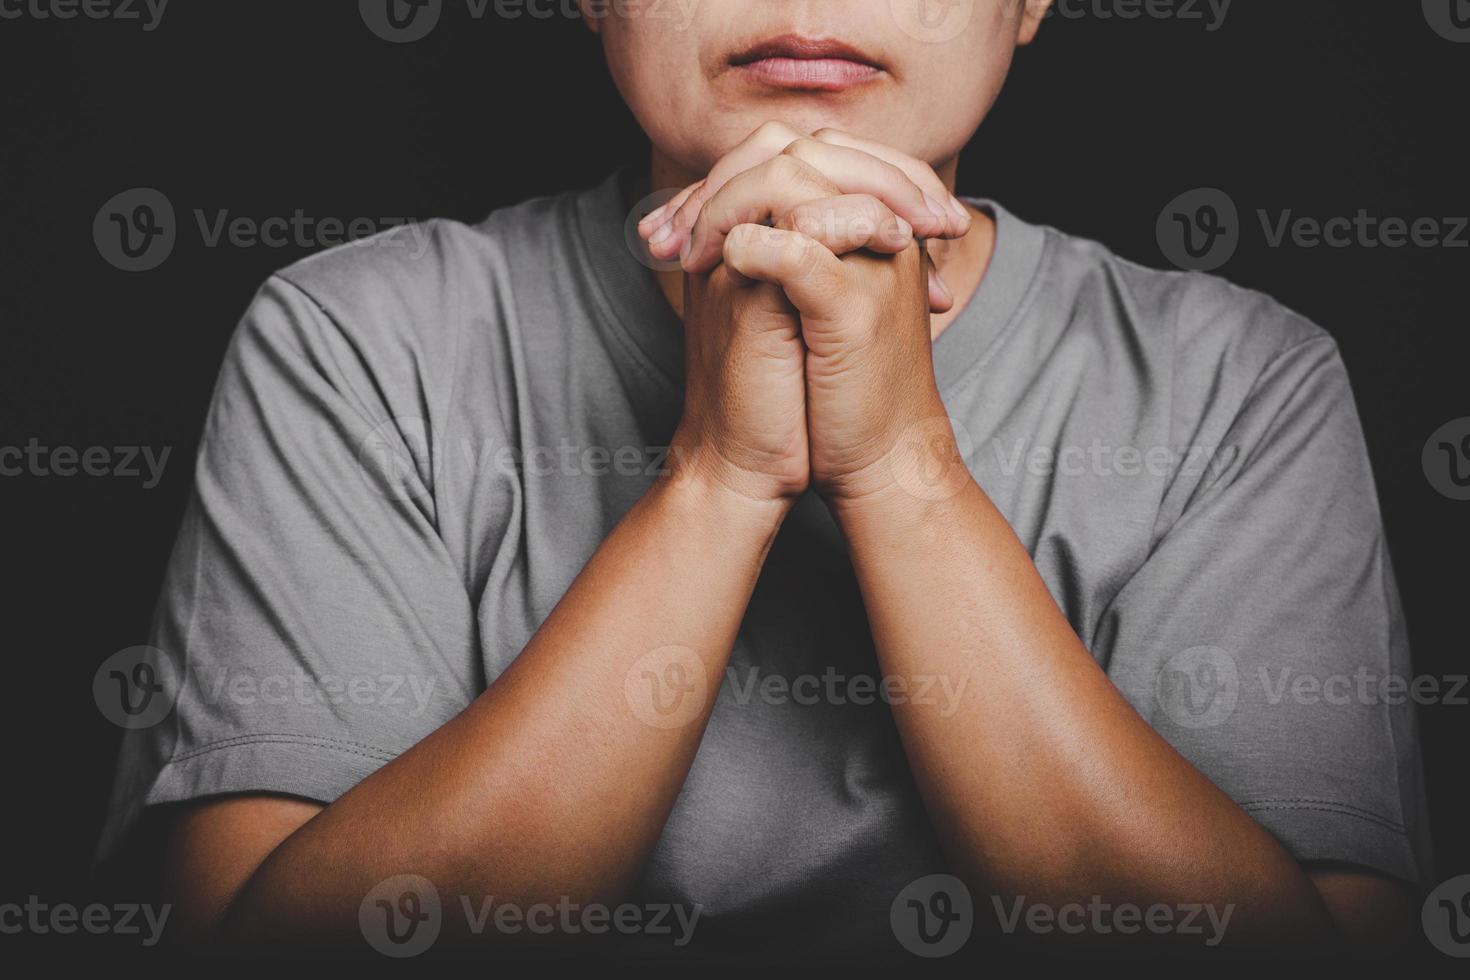 christianity woman catholic hand pray and worship in the church, Hands folded in prayer concept for faith, spirituality and religion, Hands Raised In Worship background. photo